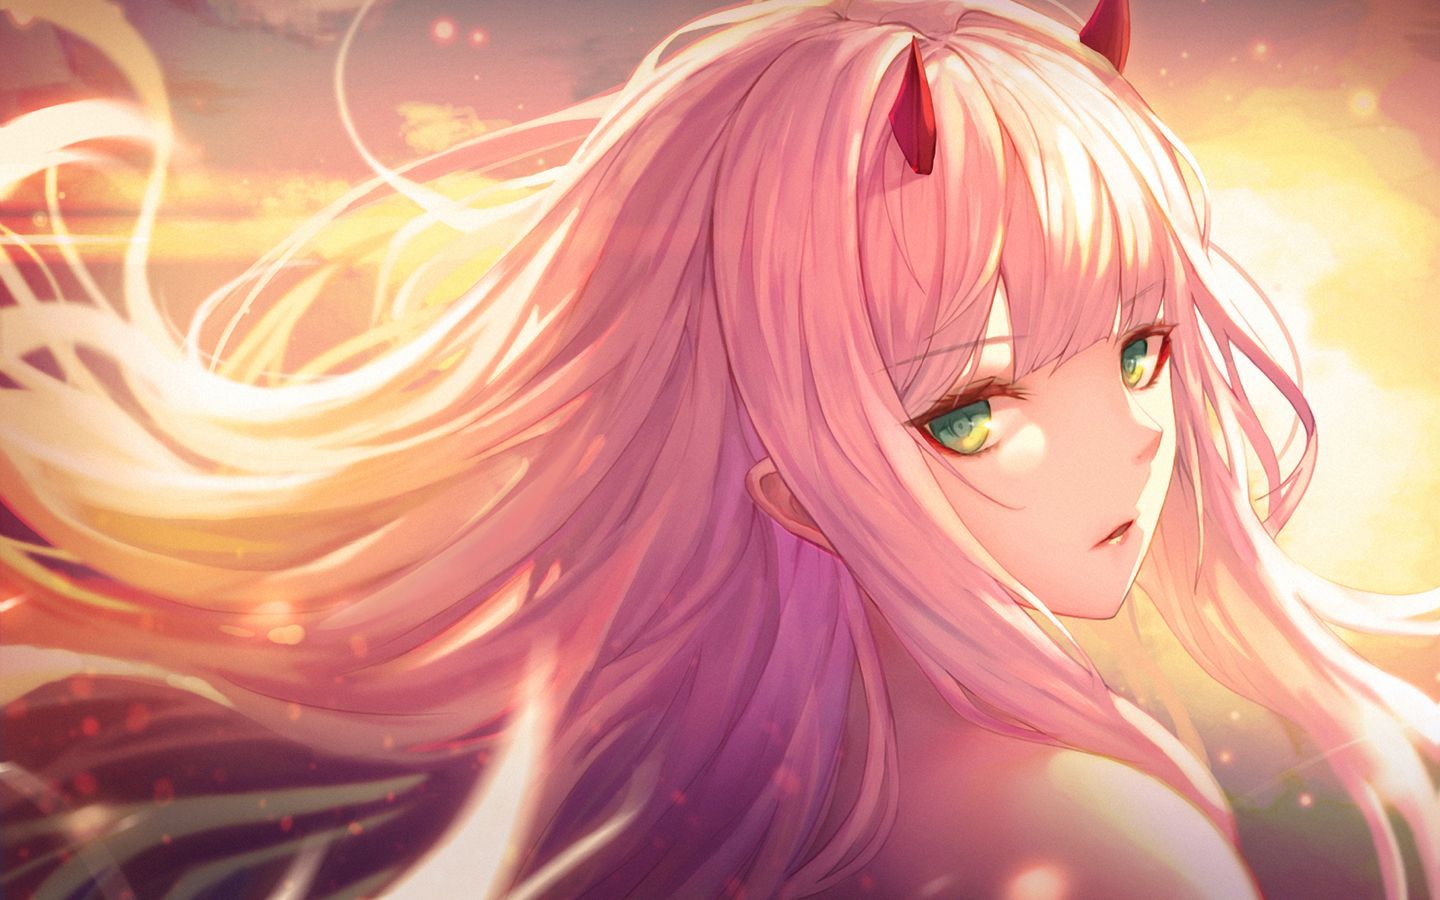 Anime girl with pink hair and green eyes staring into the distance - 1440x900